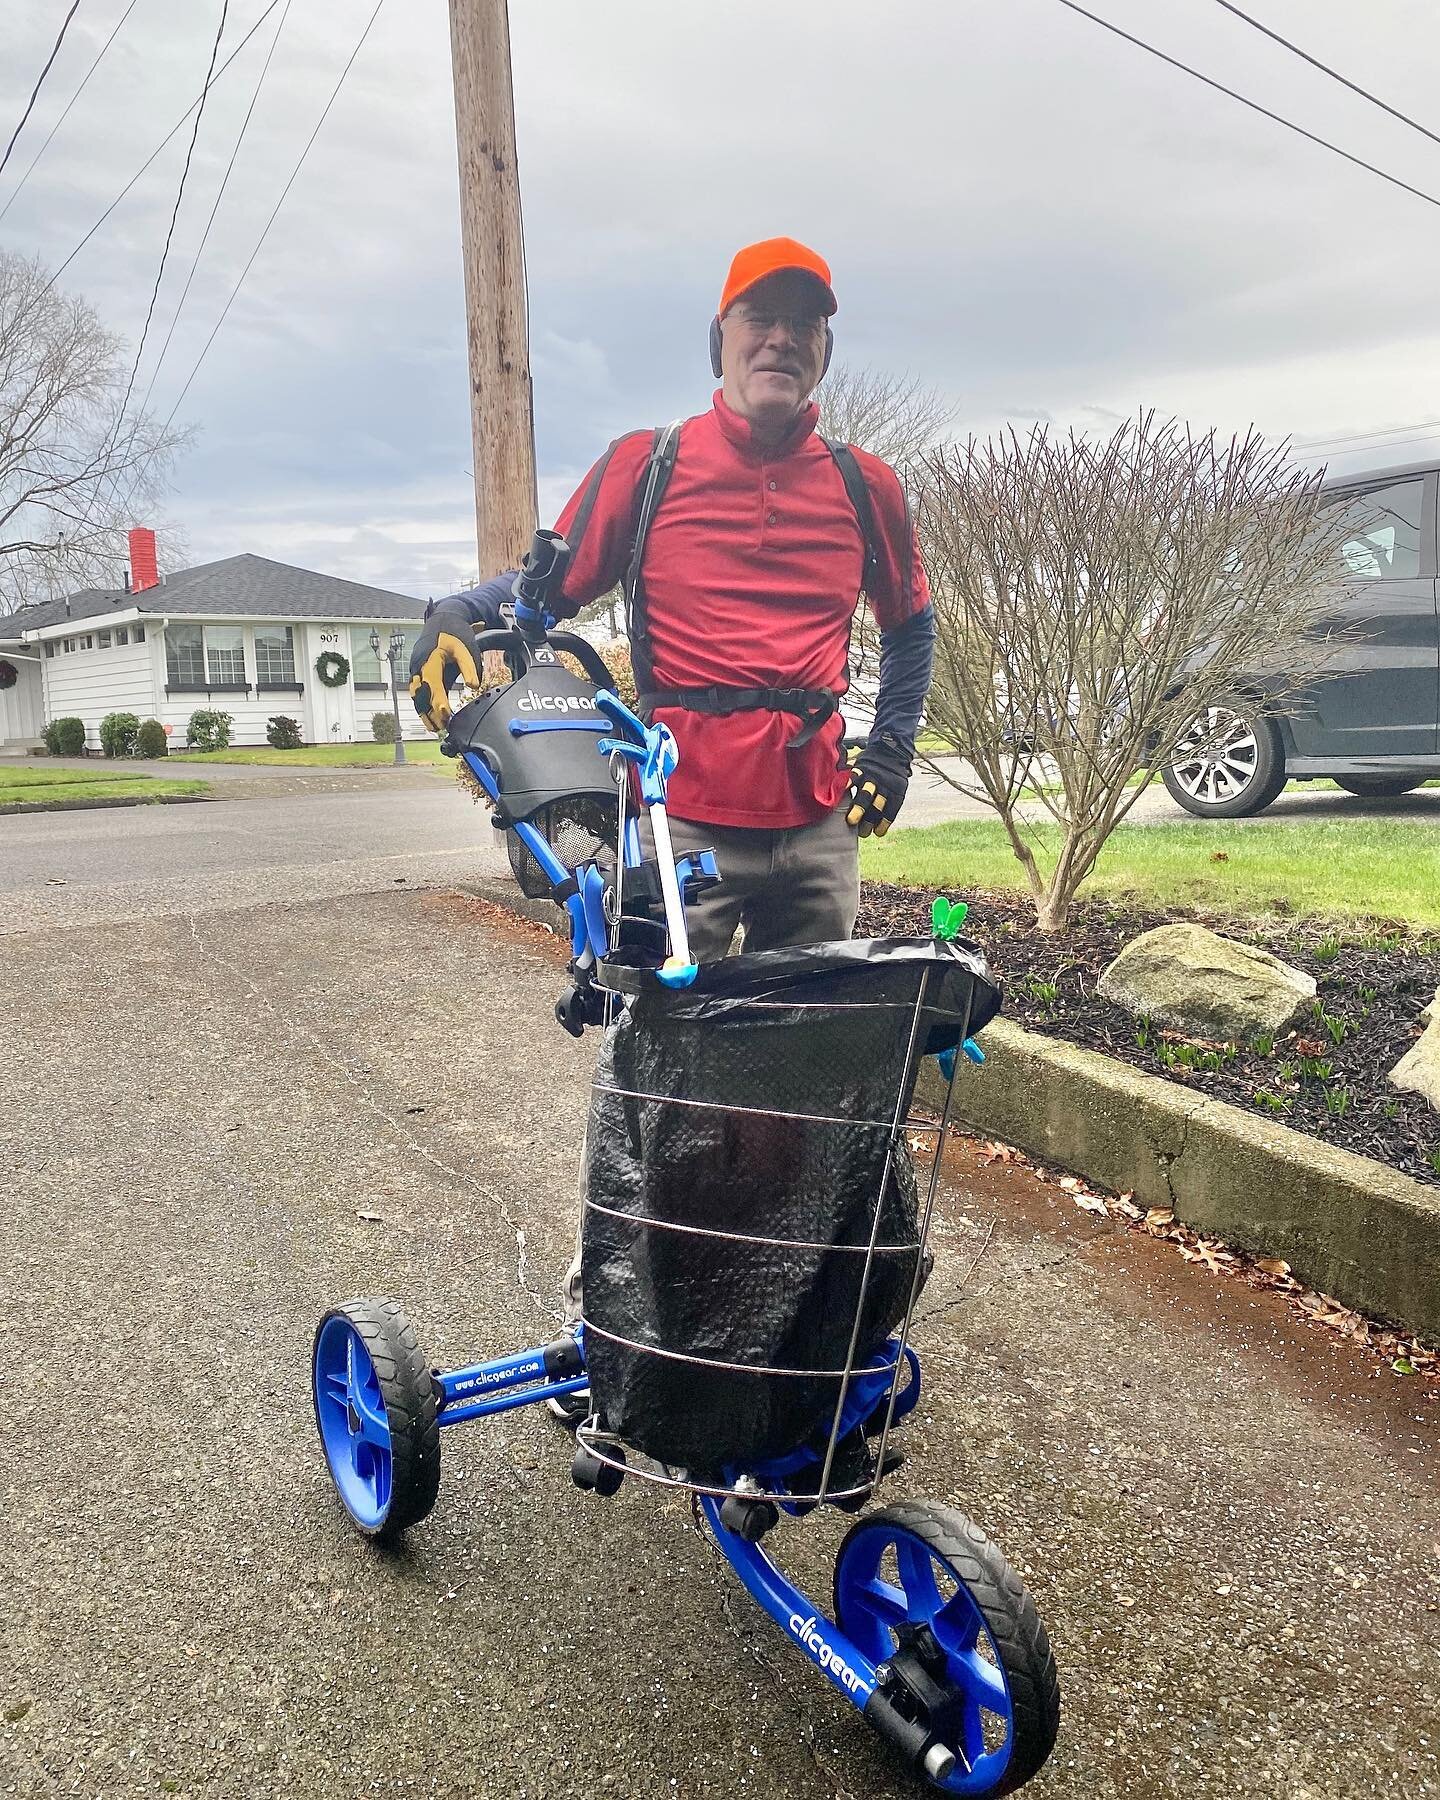 Brian Doherty walks for hours on multiple days a week around Sumner picking up litter to help keep our community clean and safe. He collects 10 to 12 of the 13-gallon bags of trash per week. We wanted to publicly thank Brian for being an unsung commu